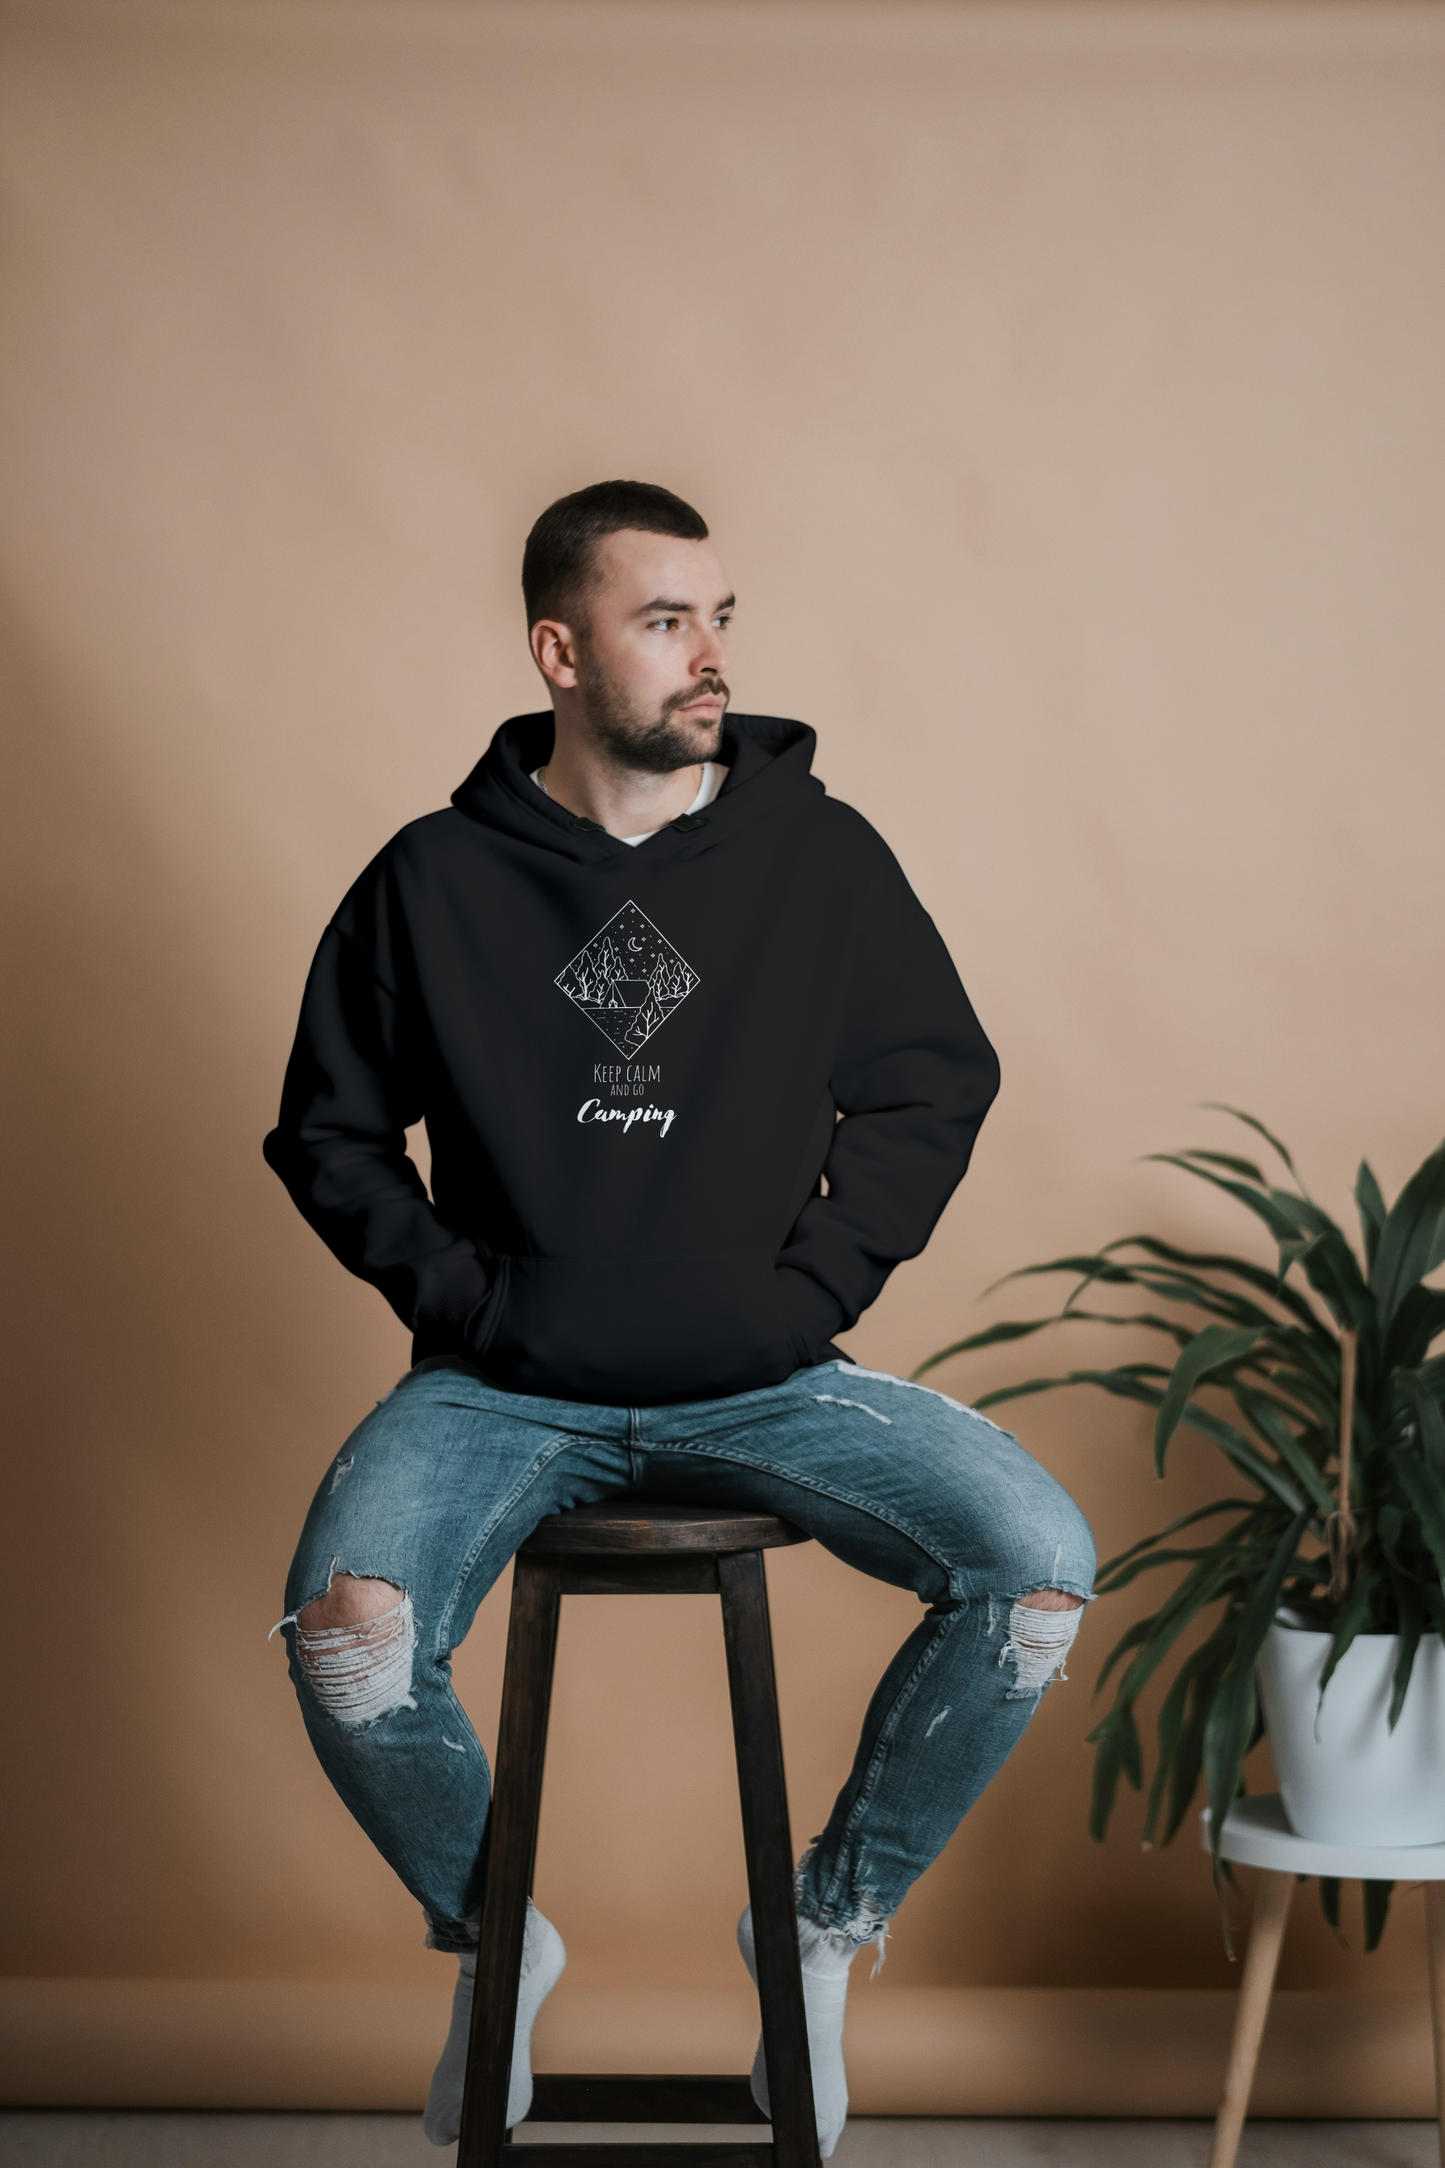 Camping Hoodie with Embroidery - Unisex Hoodie